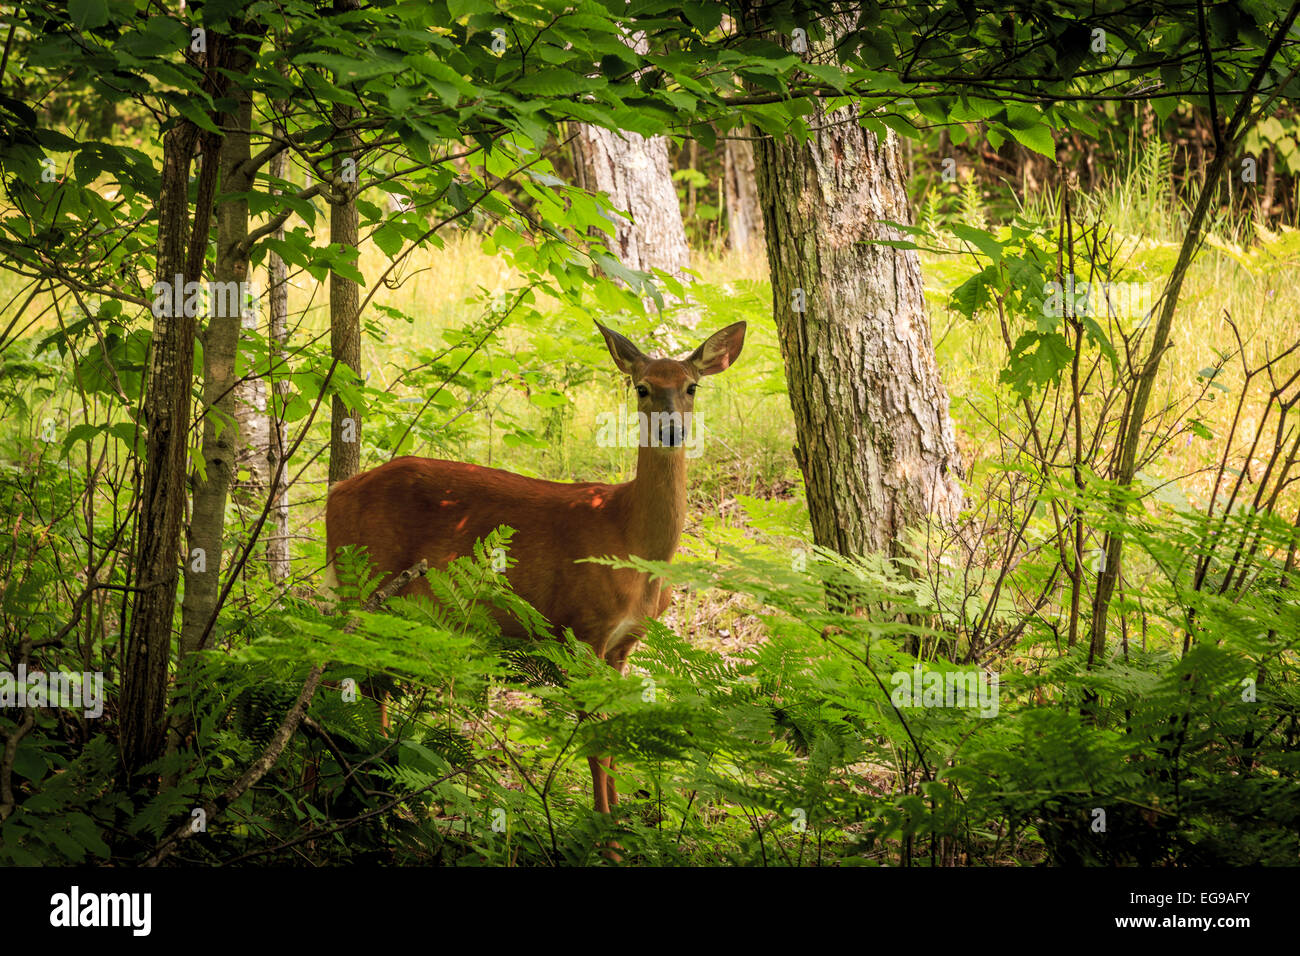 Deer in forest Stock Photo